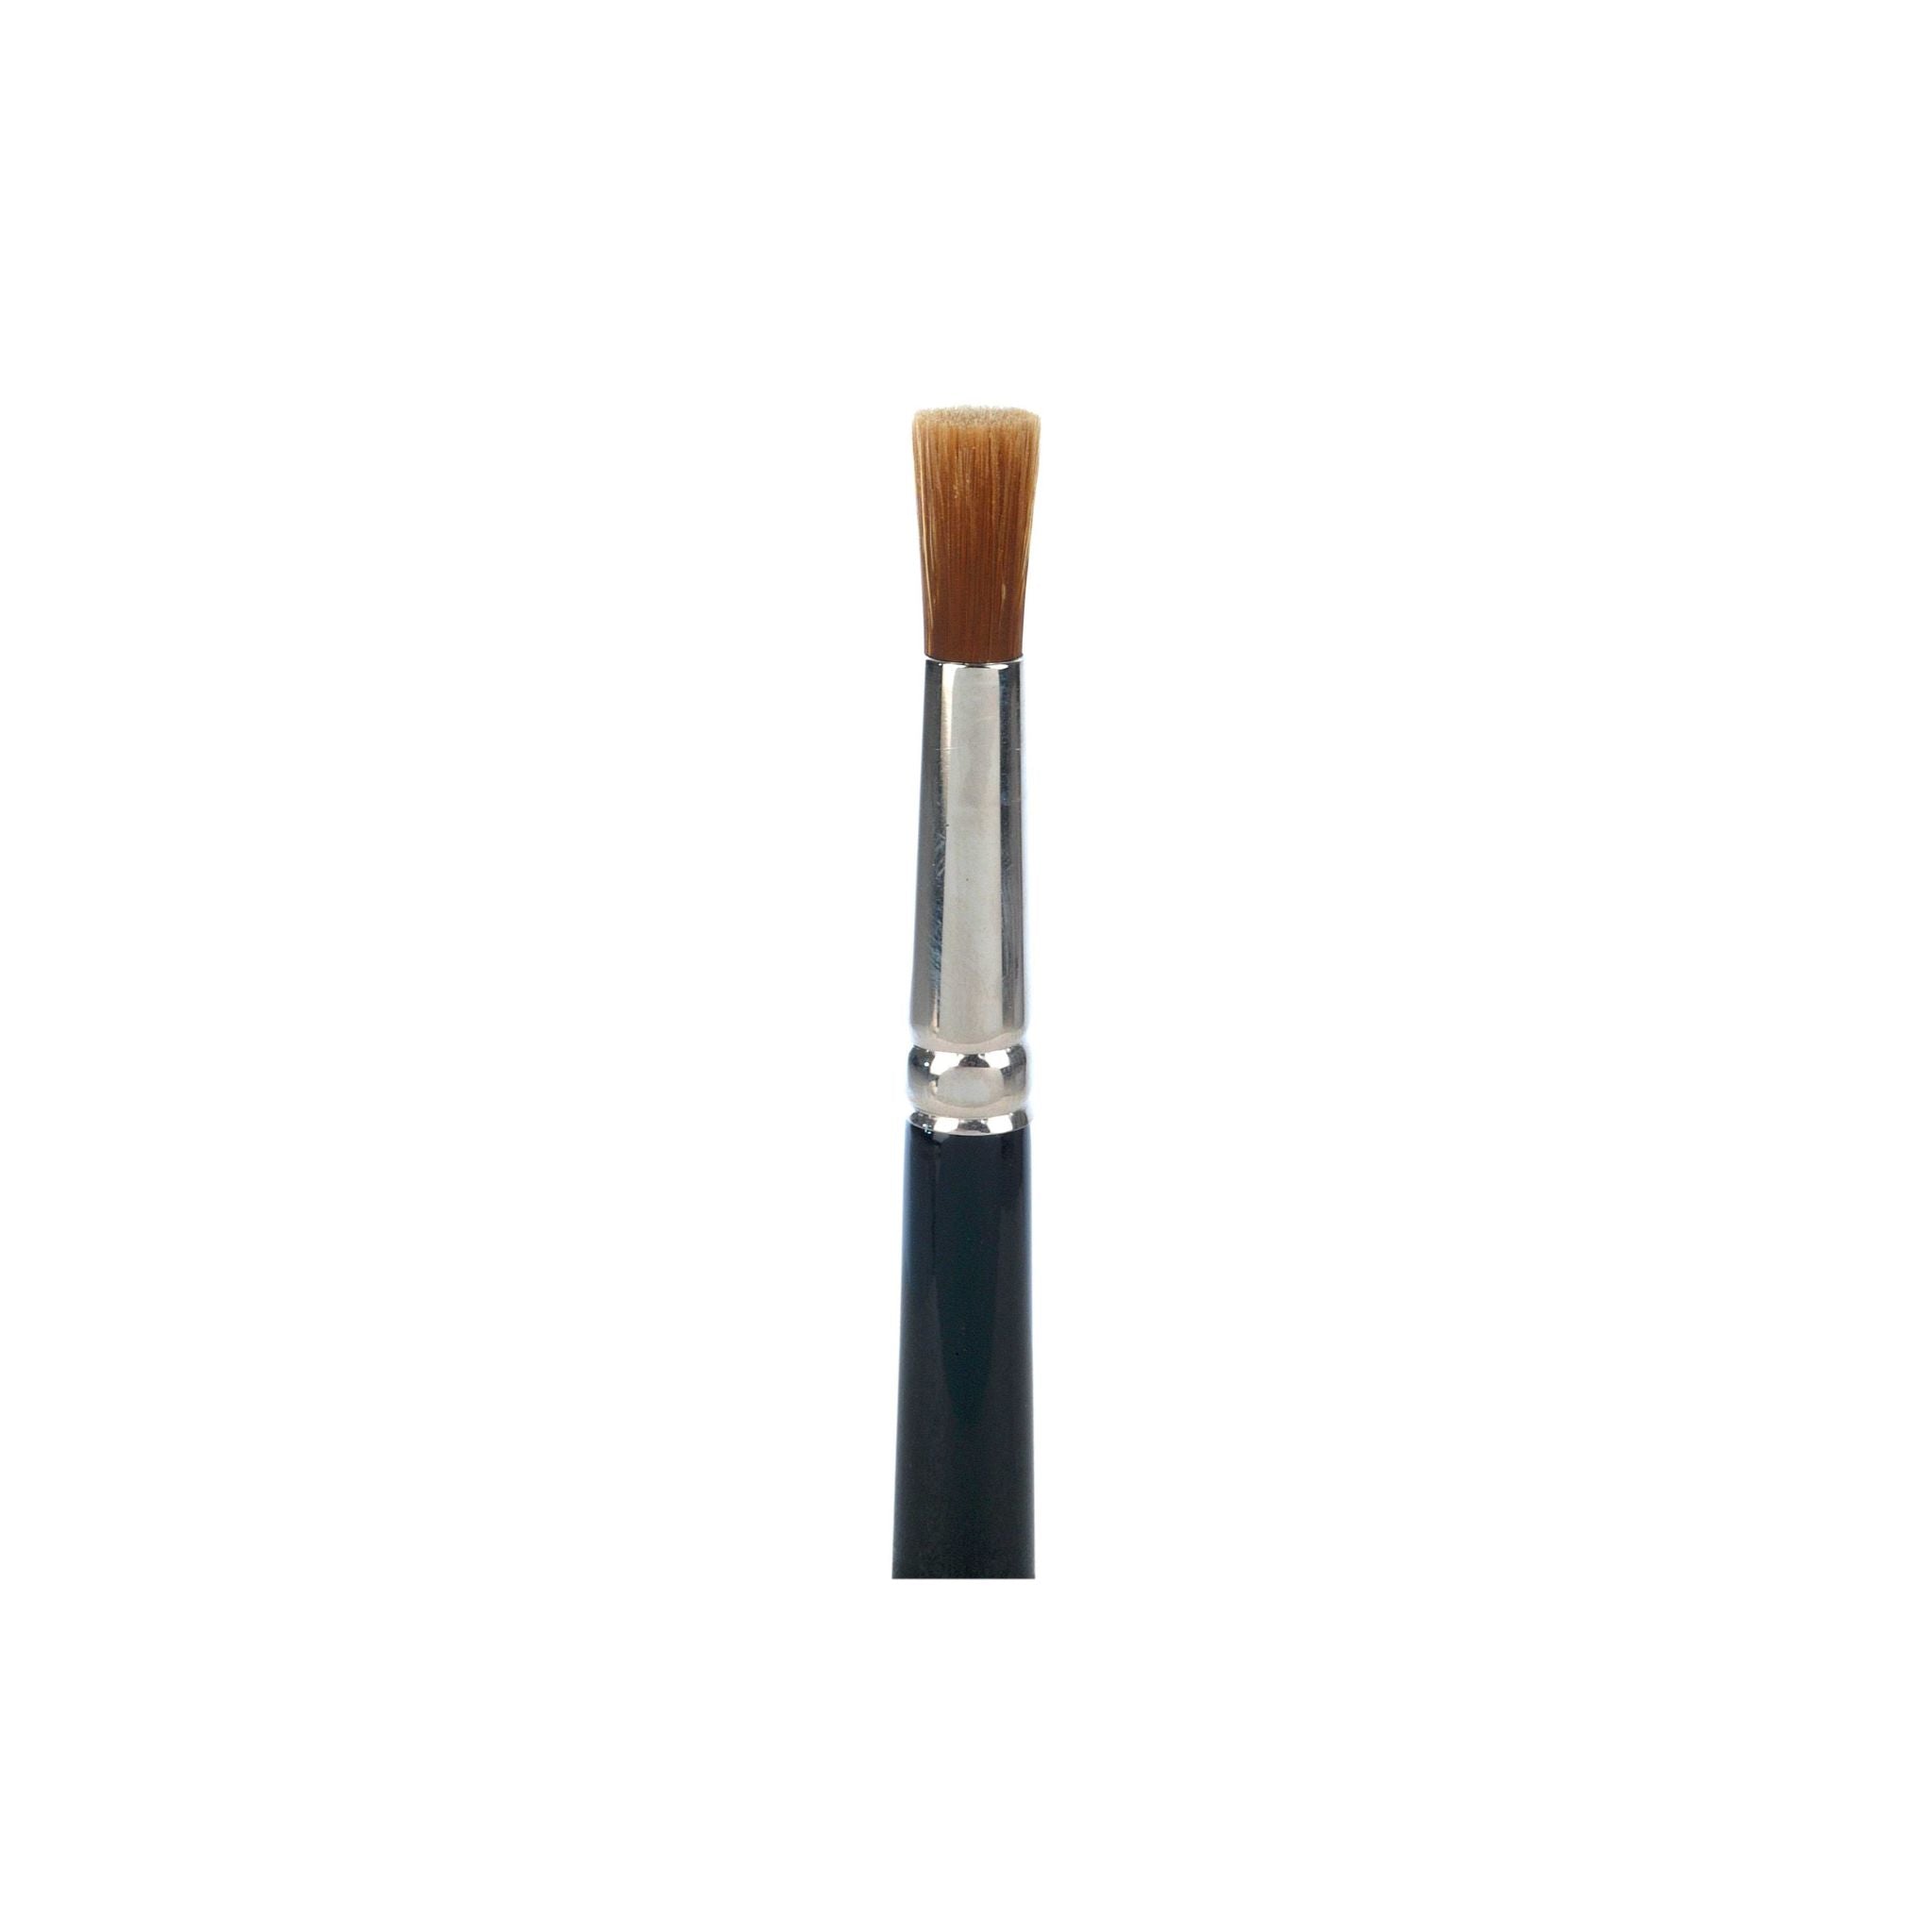 Wax smoothing brush<br> Size 14